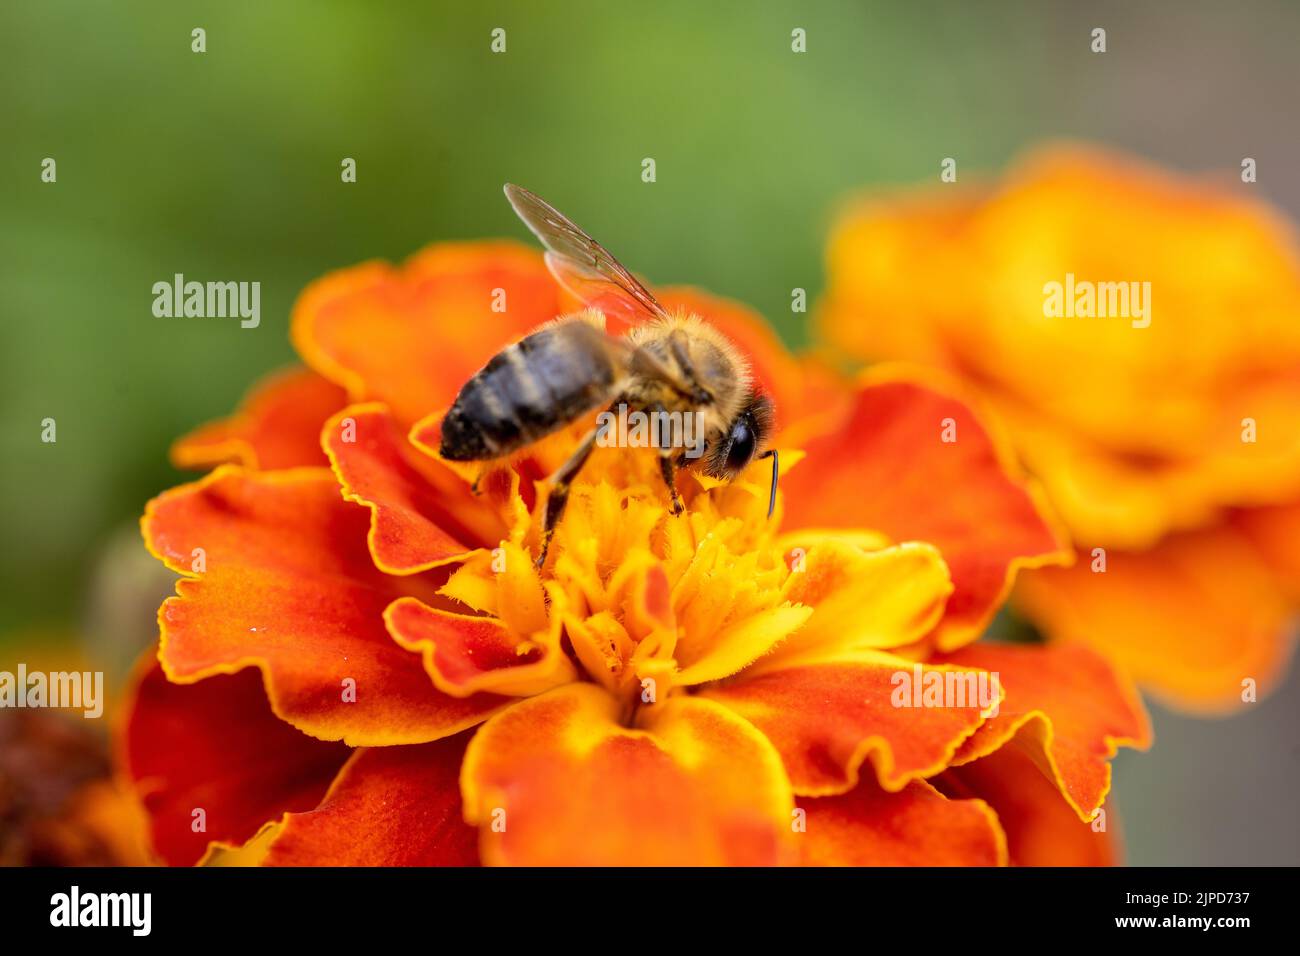 a bee collecting pollen from a flower. Marigold flower (Tagetes patula L.) close up, macro photo Stock Photo